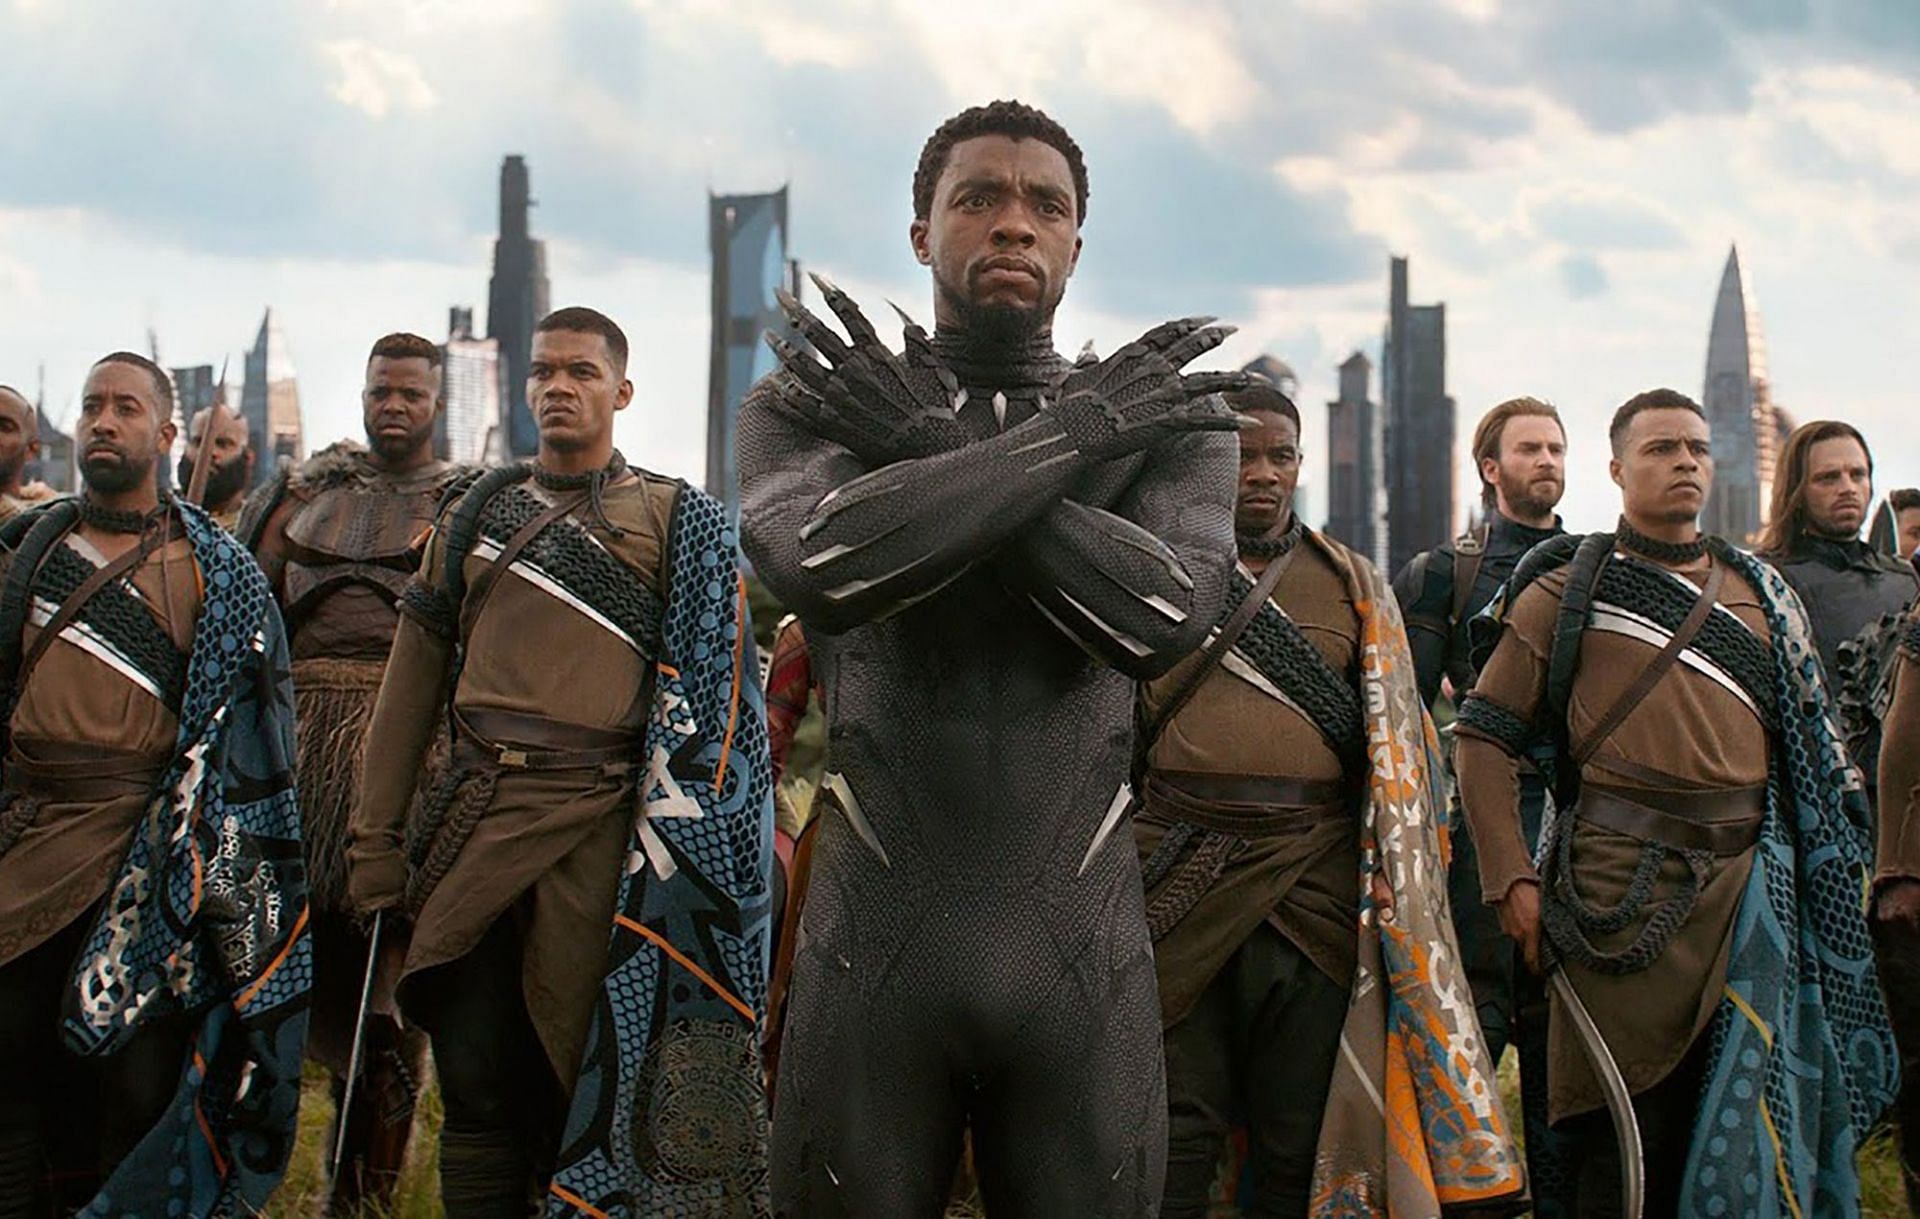 The Black Panther, T&#039;Challa, uses his strength, intellect, and vibranium suit to protect Wakanda and its people (Image via Marvel Studios)